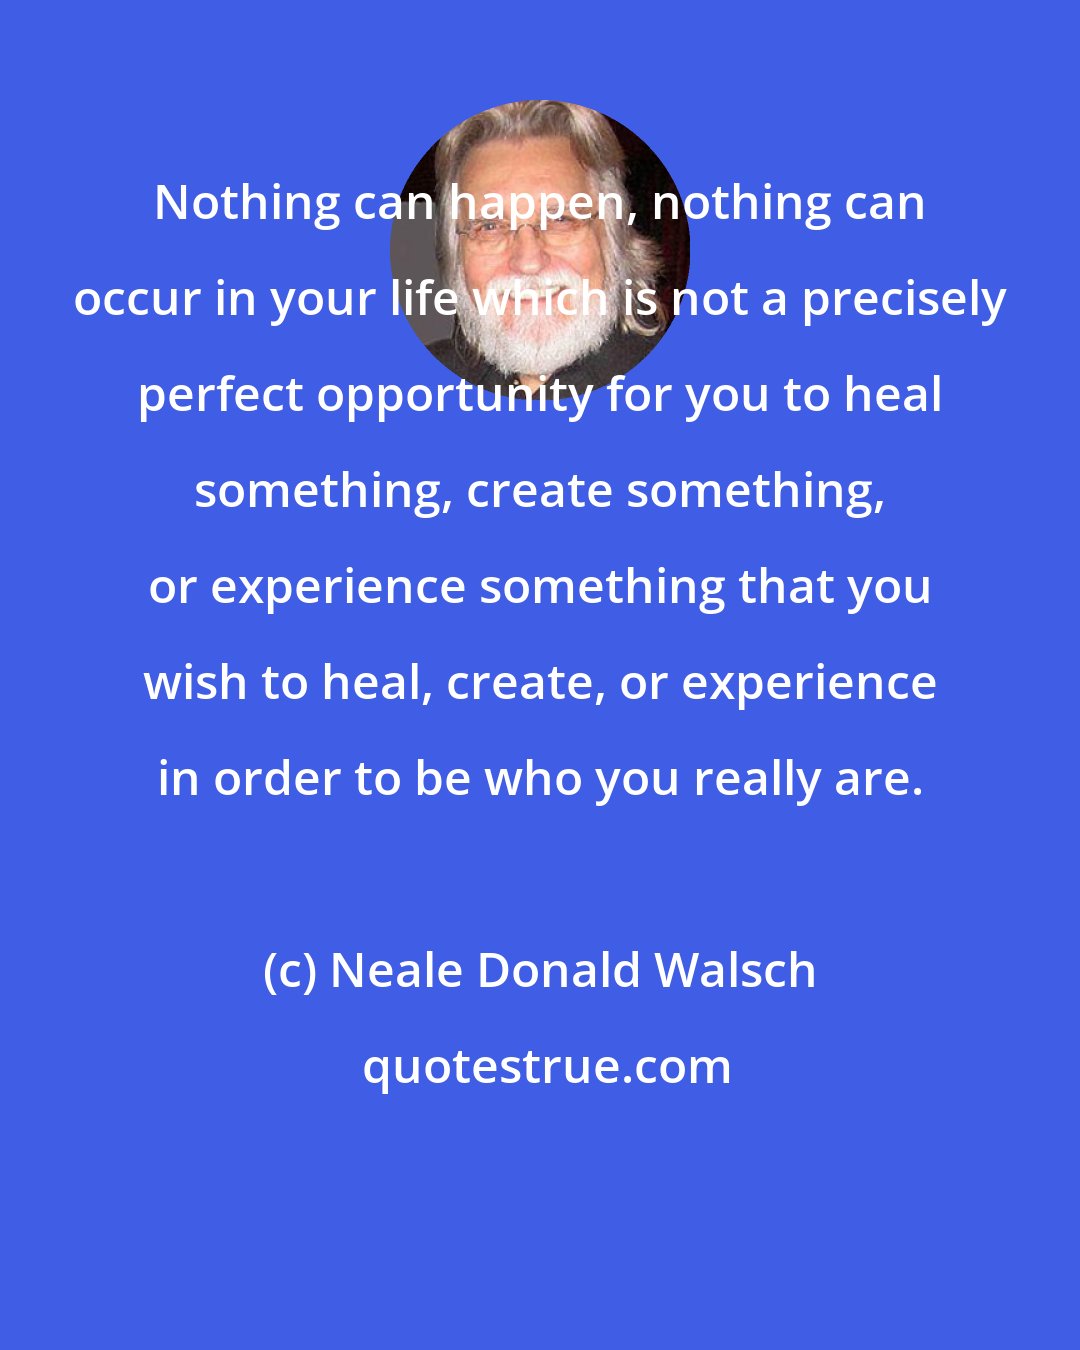 Neale Donald Walsch: Nothing can happen, nothing can occur in your life which is not a precisely perfect opportunity for you to heal something, create something, or experience something that you wish to heal, create, or experience in order to be who you really are.